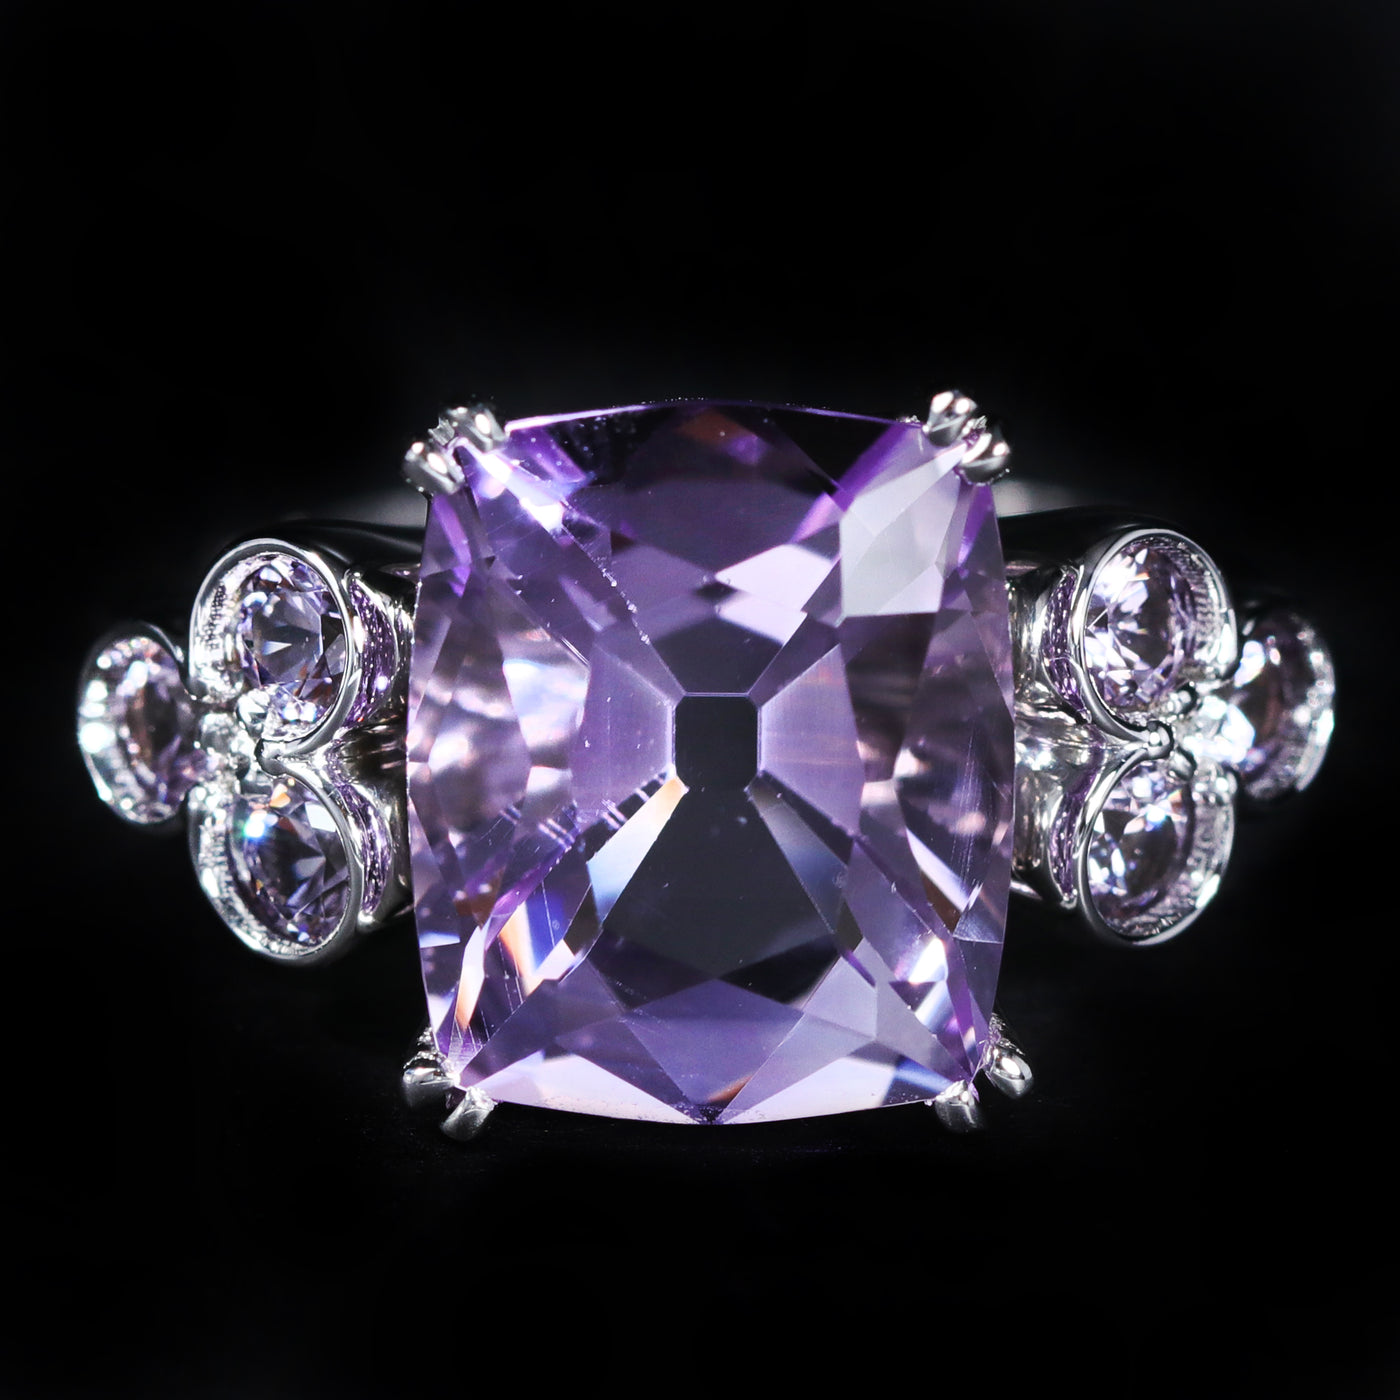 14K White Gold 4.95 Carat Amethyst and Spinel Ring